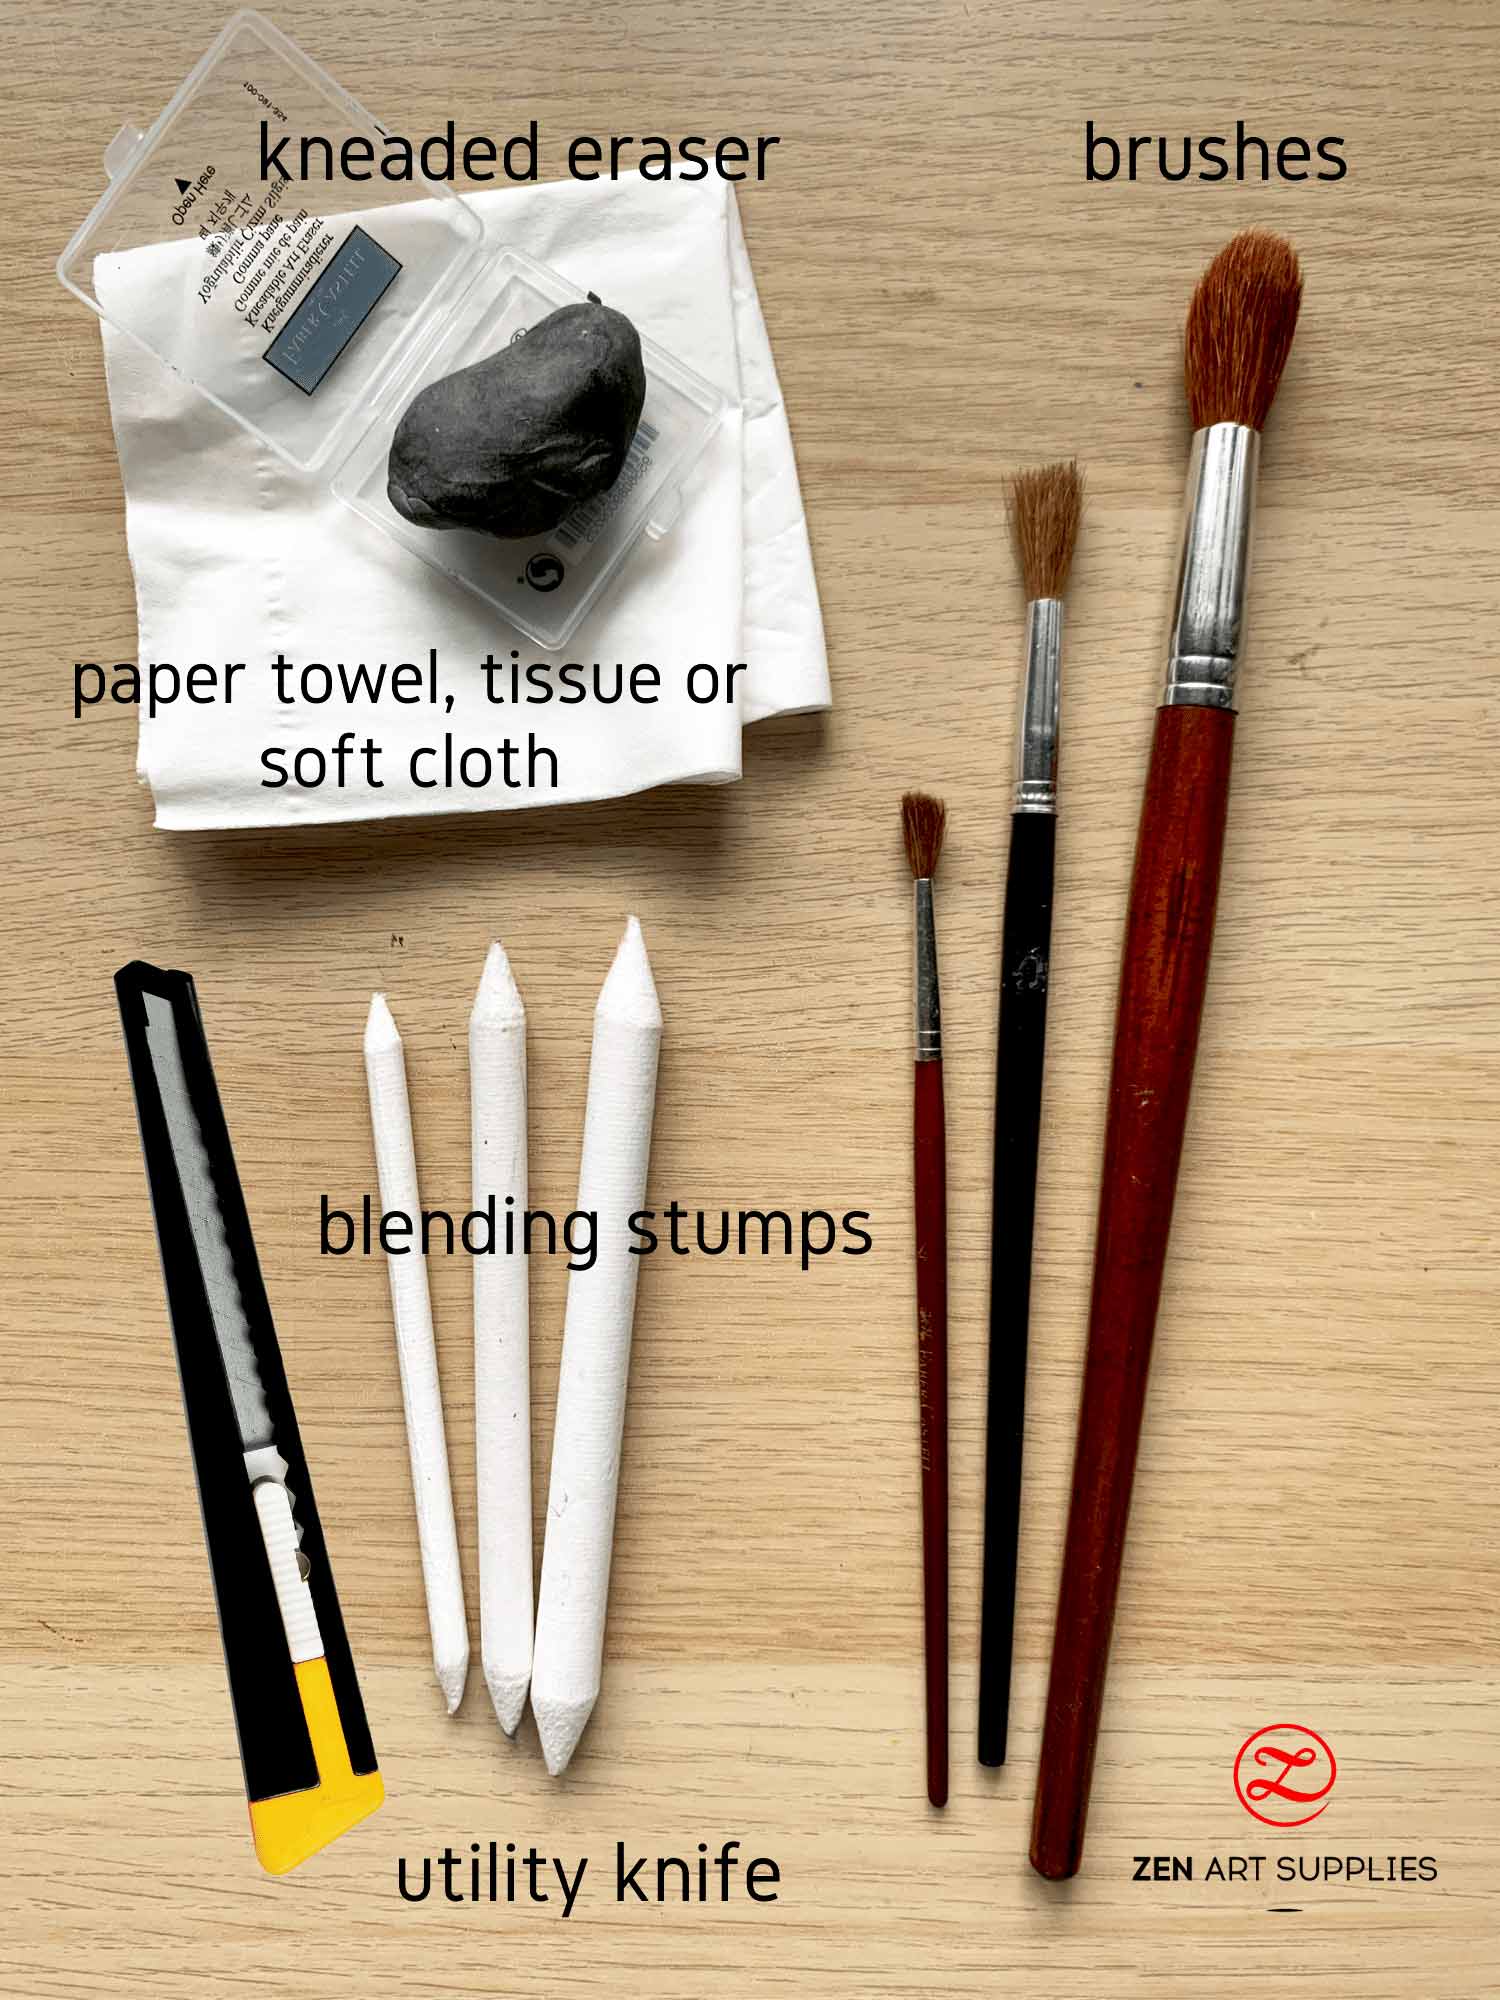 What's That Paper Stump For? Our Charcoal Art Kits Include